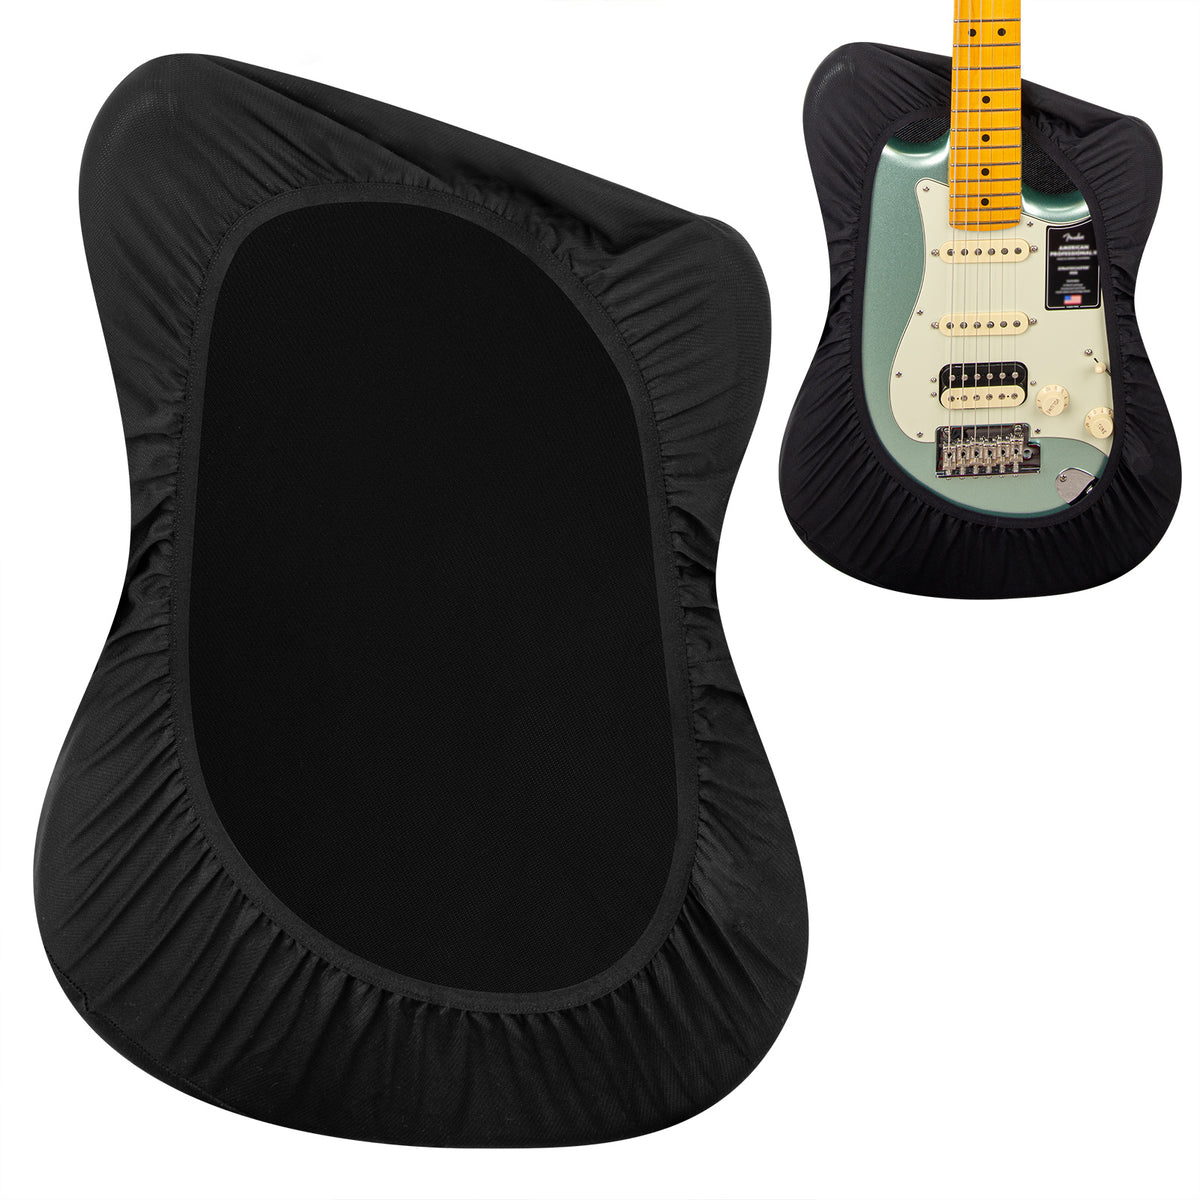 Musiic Guitar Cover, Premium Black Stretchy Fabric Guitar Dust Cover, Portable Sleeve cover Protect for Electric Bass Guitars